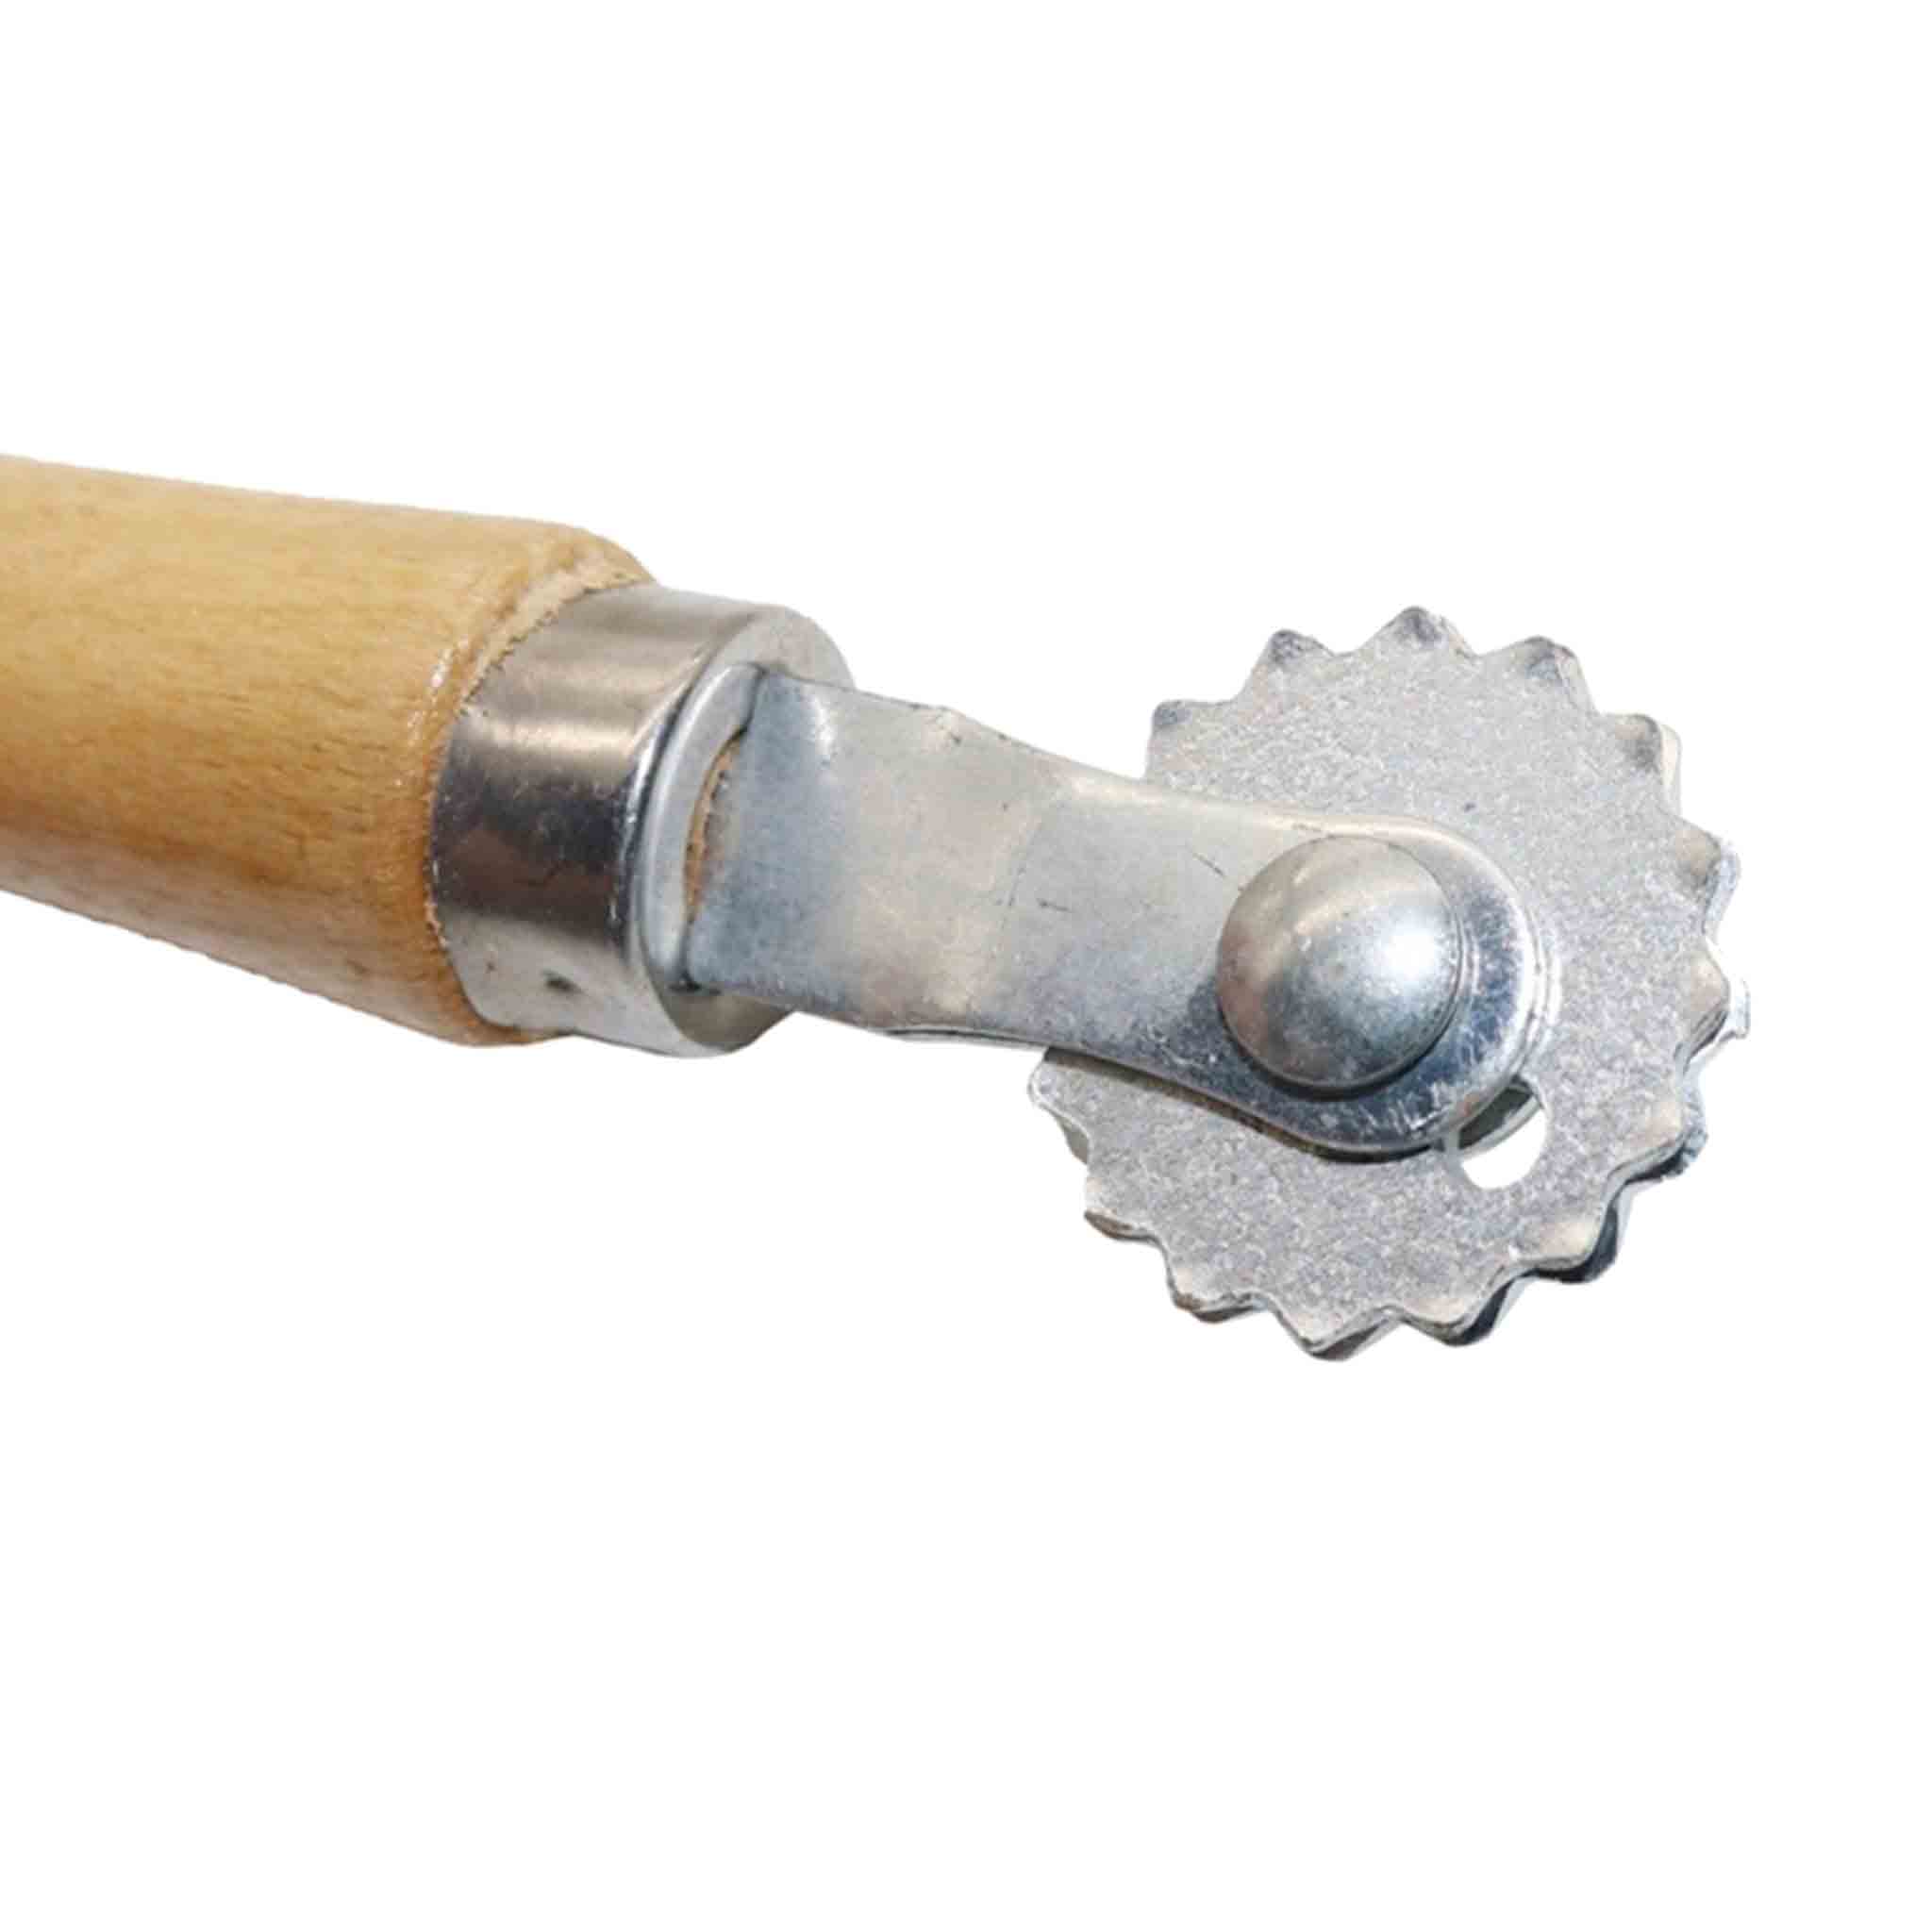 Wheel Type Wire Embedder with Wooden Handle - Tools collection by Buzzbee Beekeeping Supplies